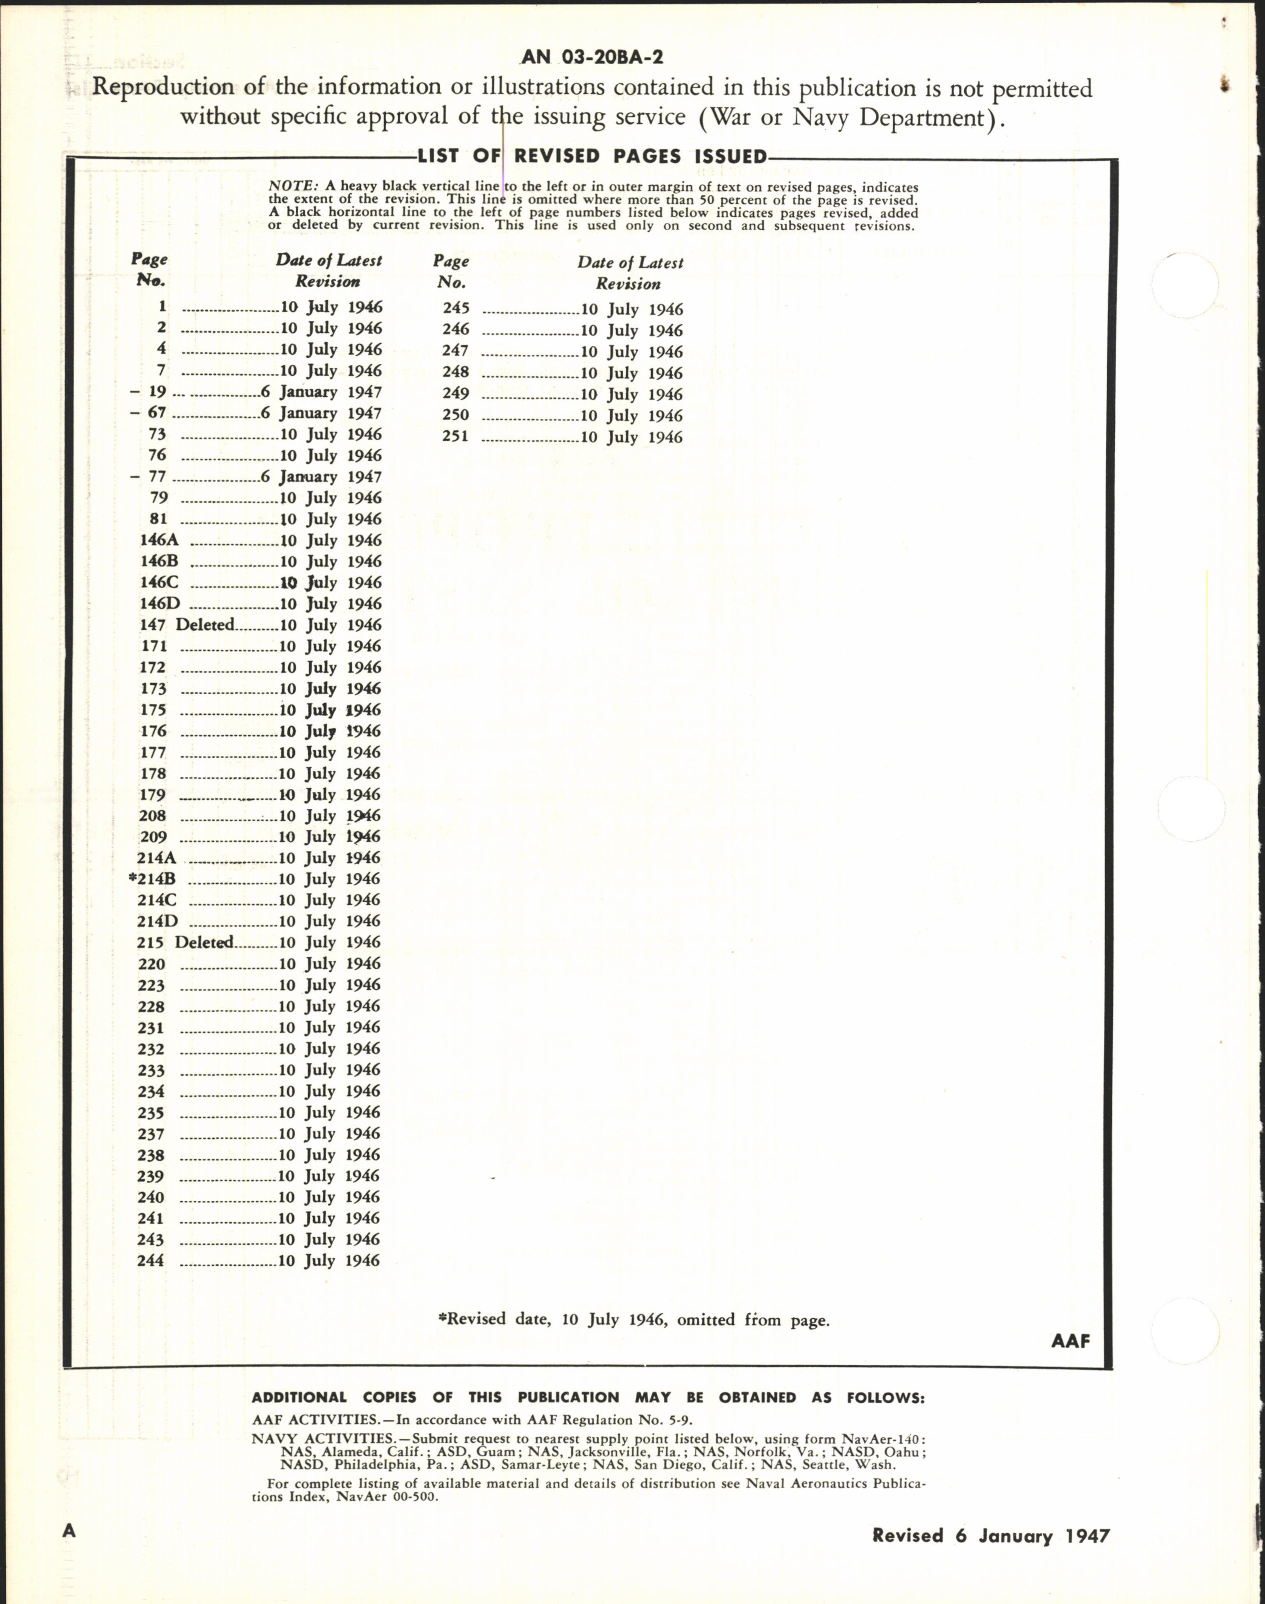 Sample page 2 from AirCorps Library document: Parts Catalog for Electric Propeller Control System